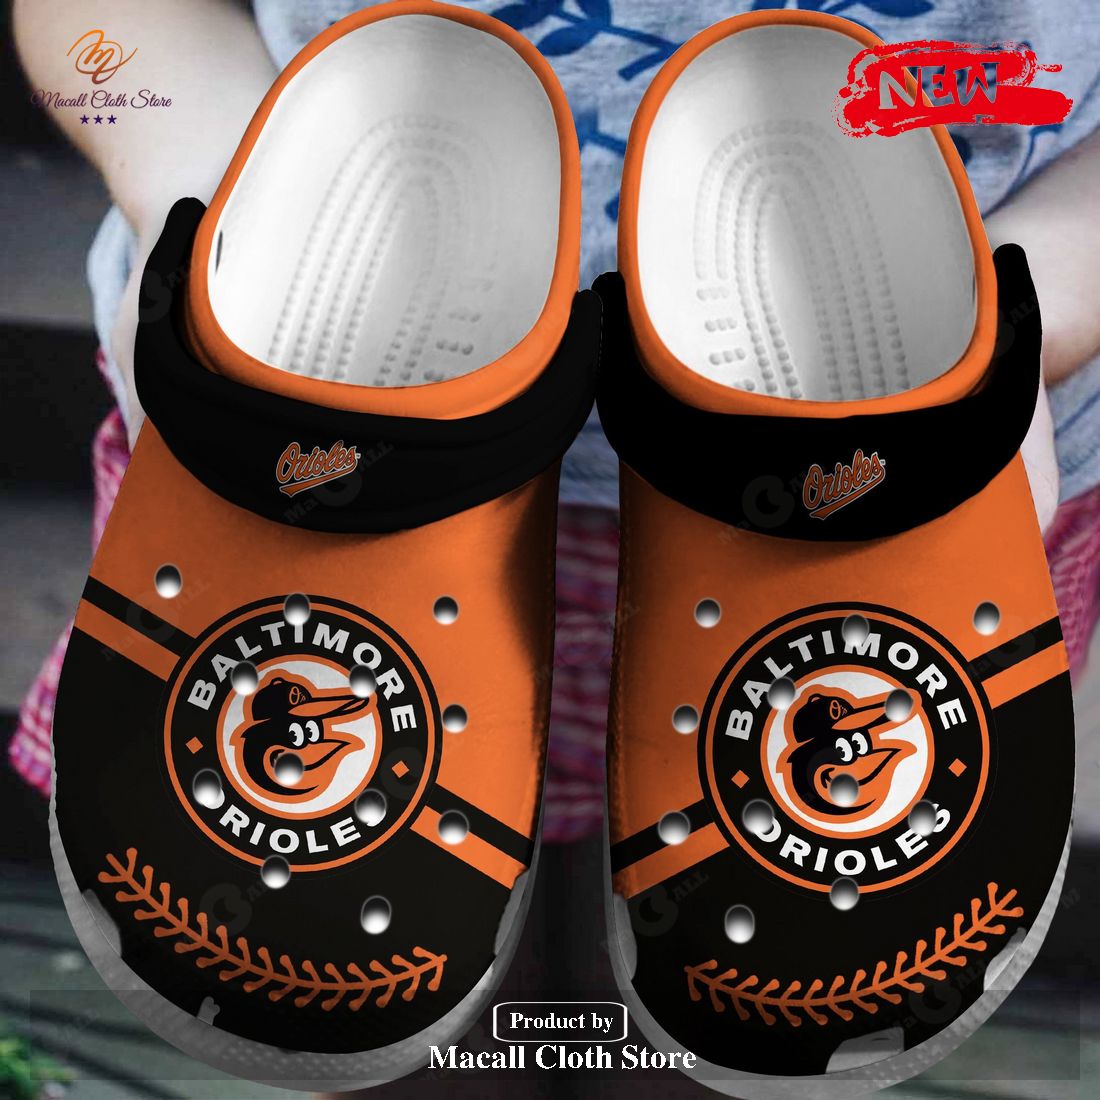 Inhalen Getalenteerd noedels NEW] Hot MLB Team Baltimore Orioles Black-Orange Crocs Clog Shoes Trusted  Shopping Online In The World - Macall Cloth Store - Destination for  fashionistas